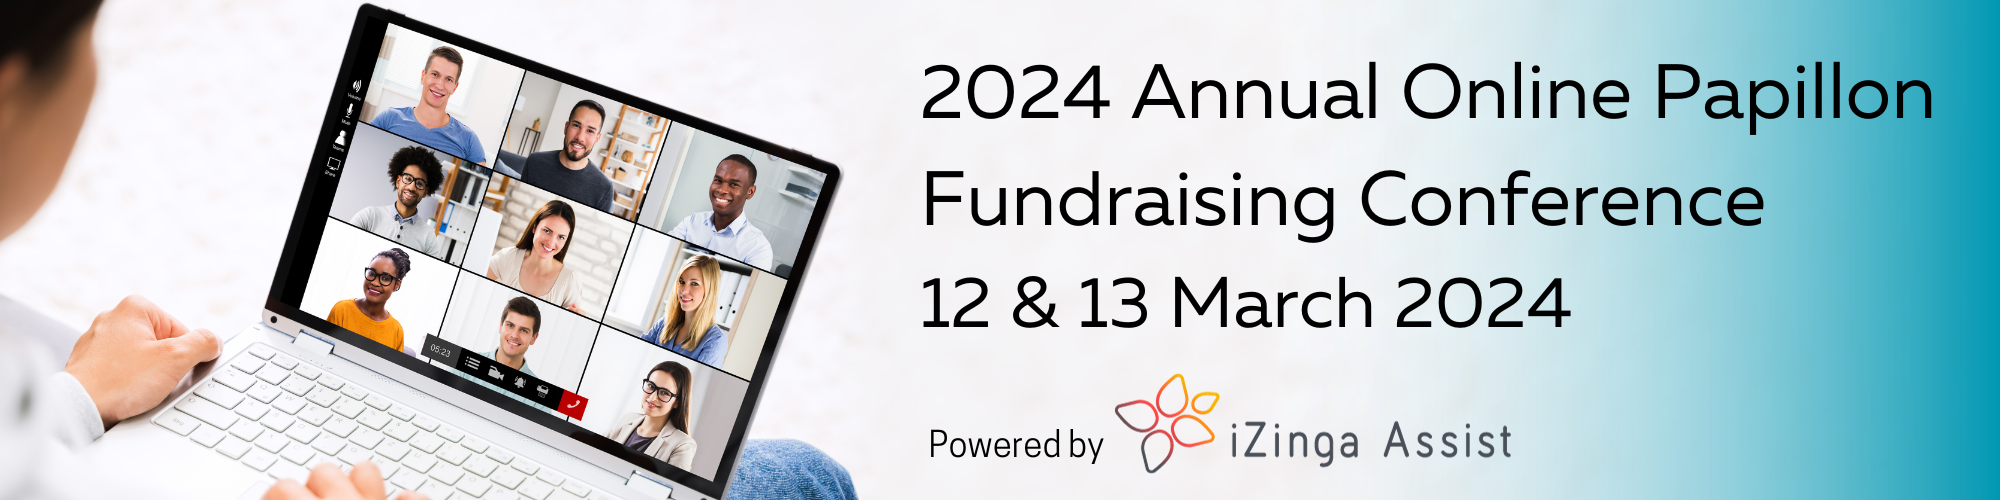 2024 Online Annual Fundraising Conference Papillon